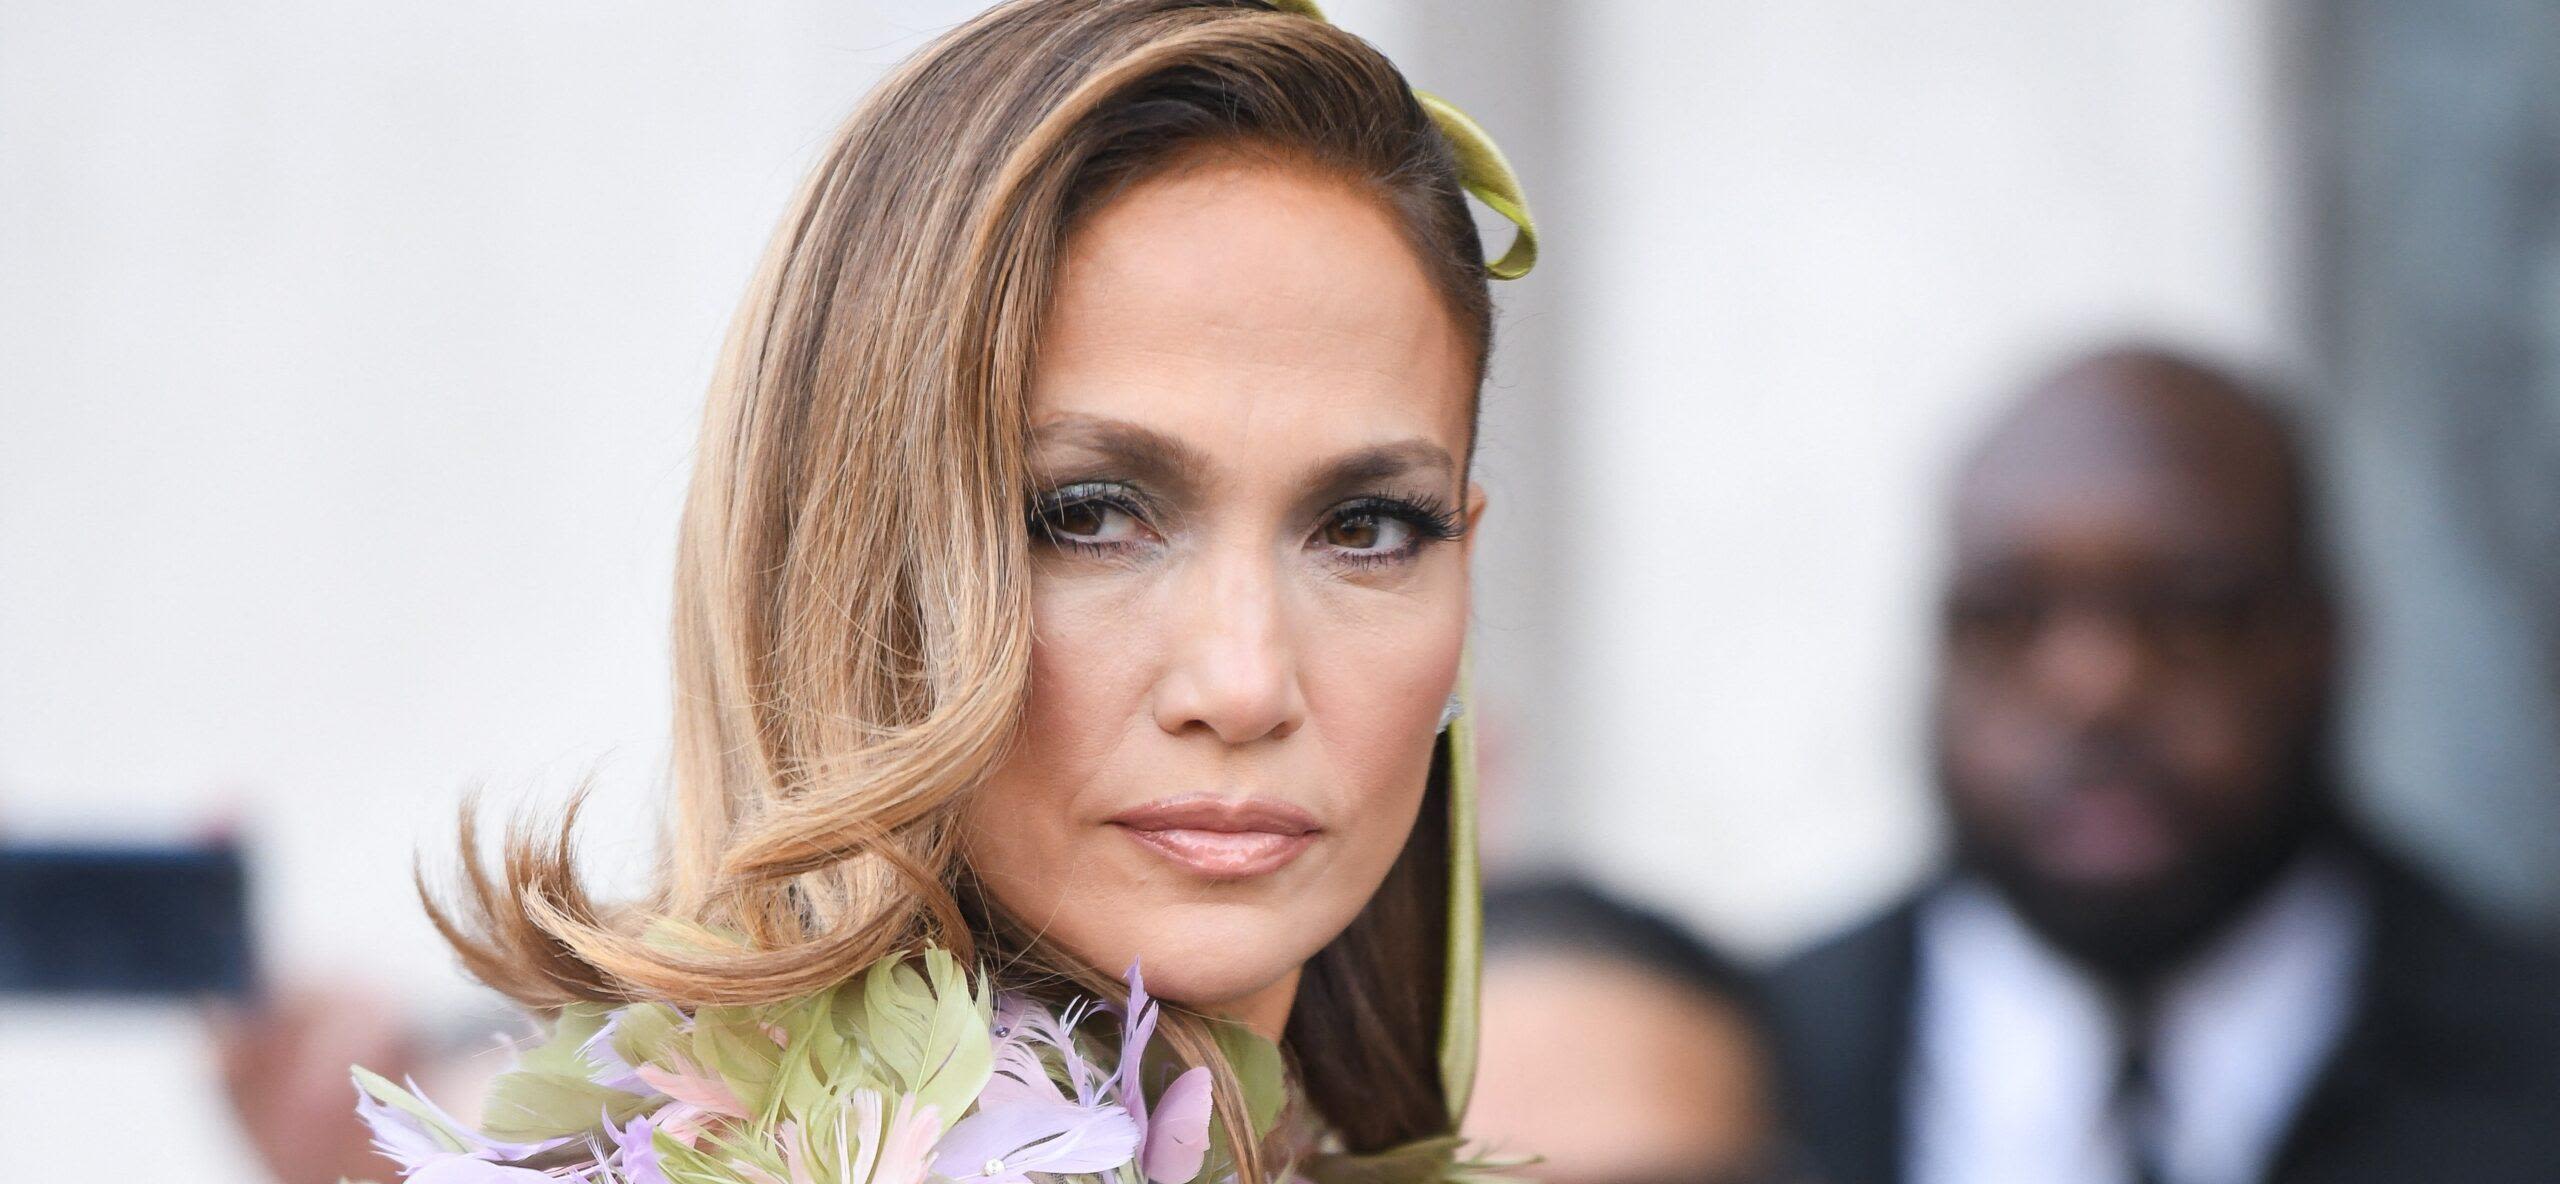 Jennifer Lopez's $90M Vegas Residency Reportedly At Risk As Her New Album And Tour Flop